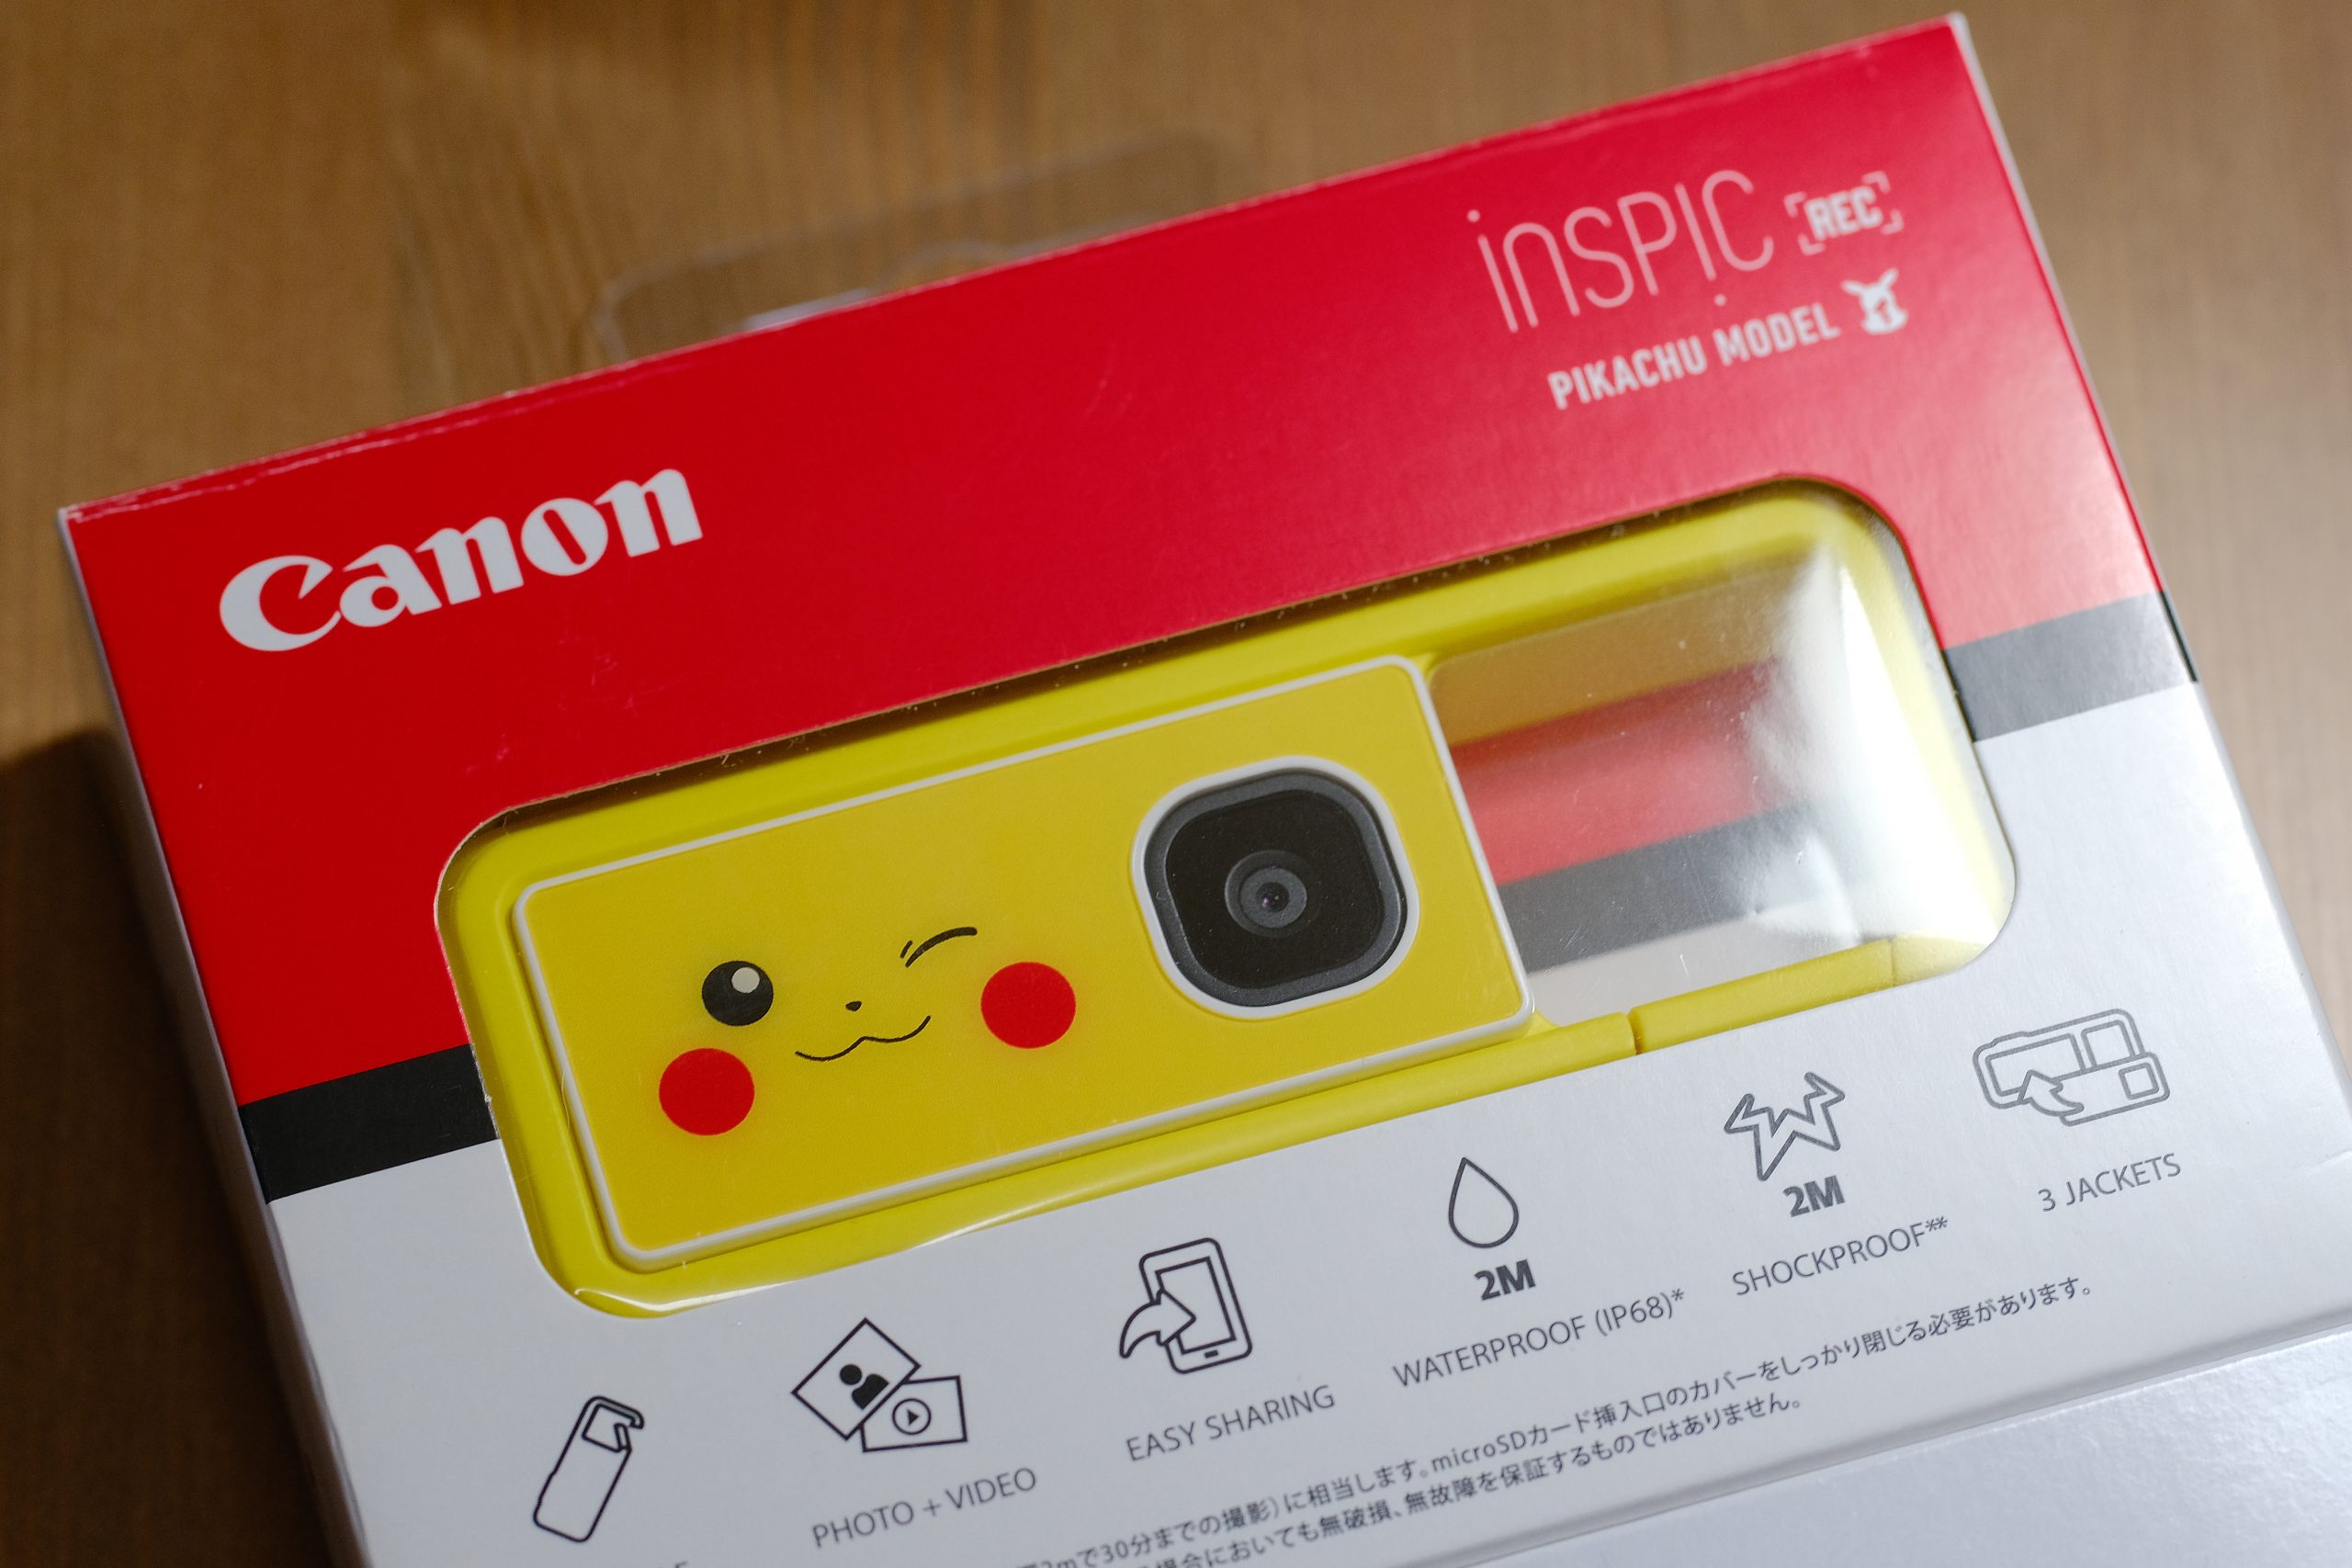 Canon】可愛すぎる Canon iNSPiC REC PIKACHU MODEL | THE MAP TIMES